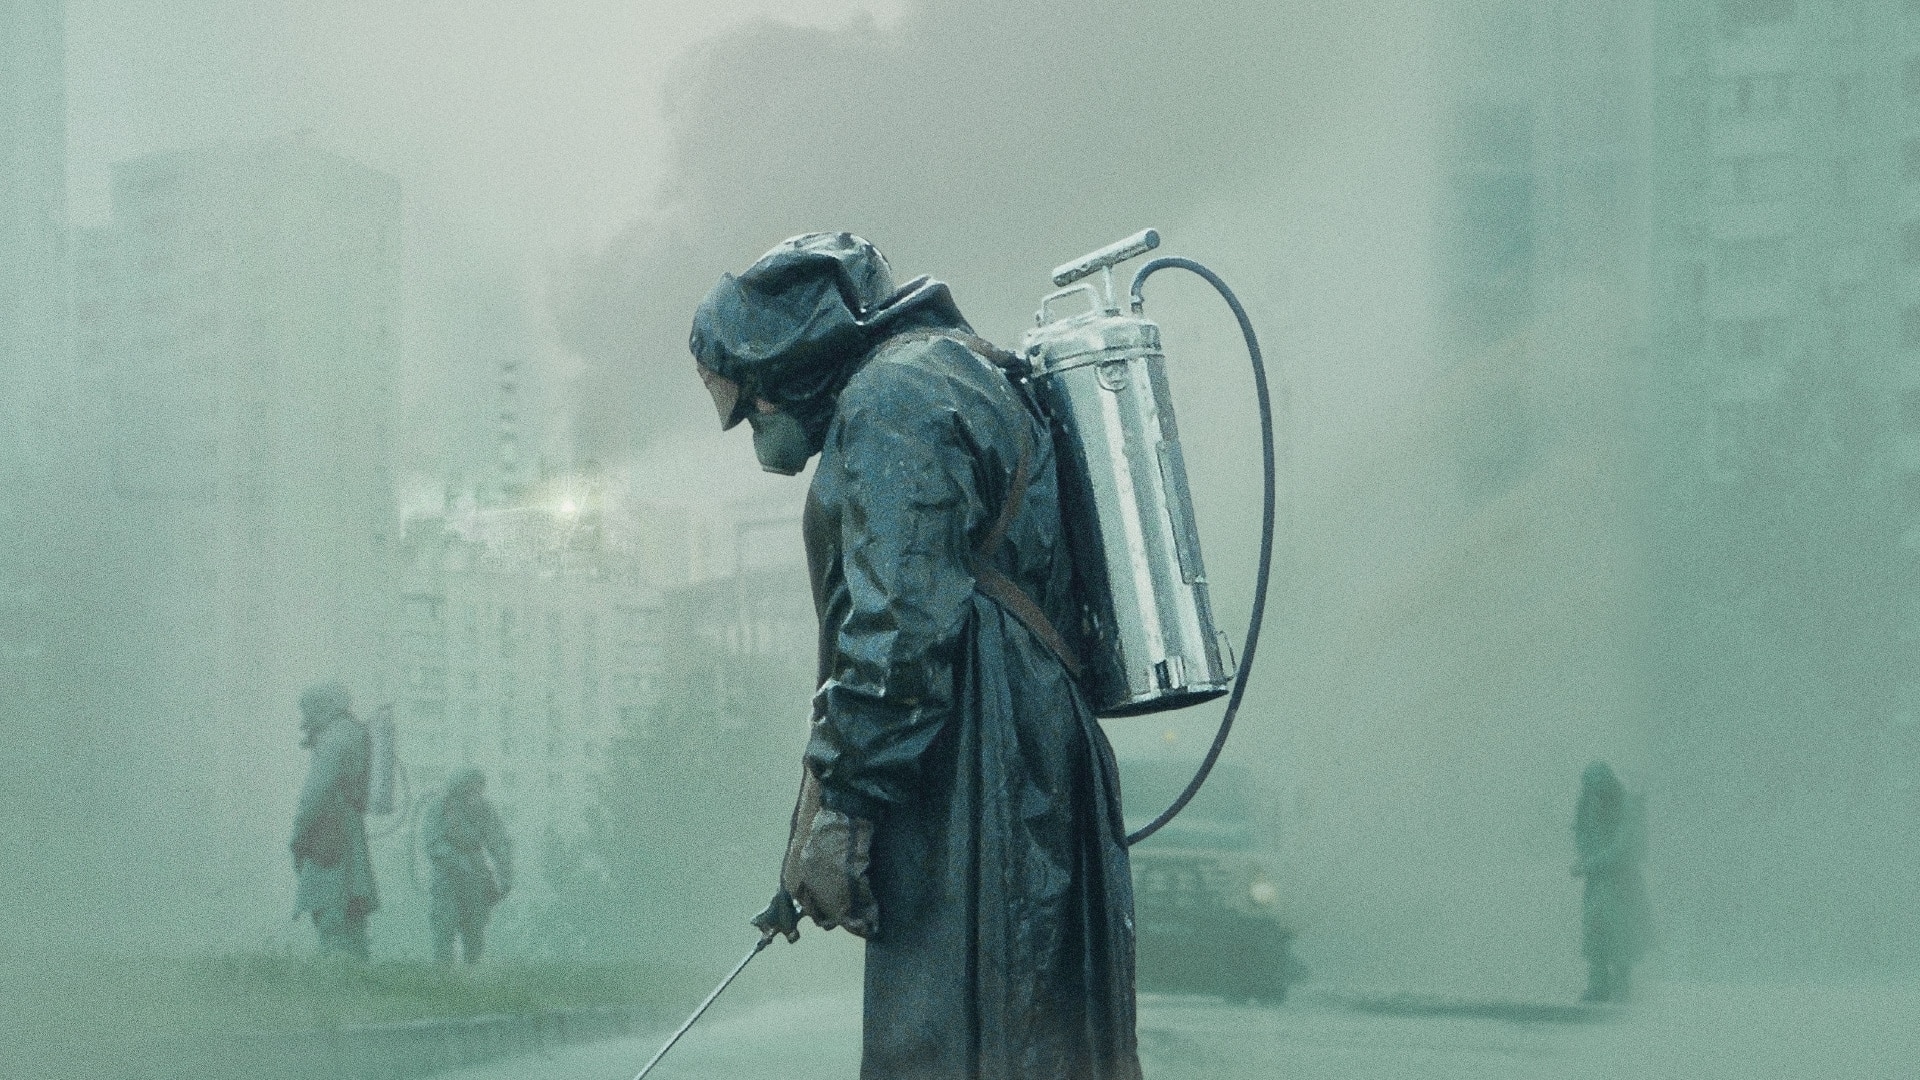 chernobyl ka 1920 18 Of The Best TV Pilots Ever Made